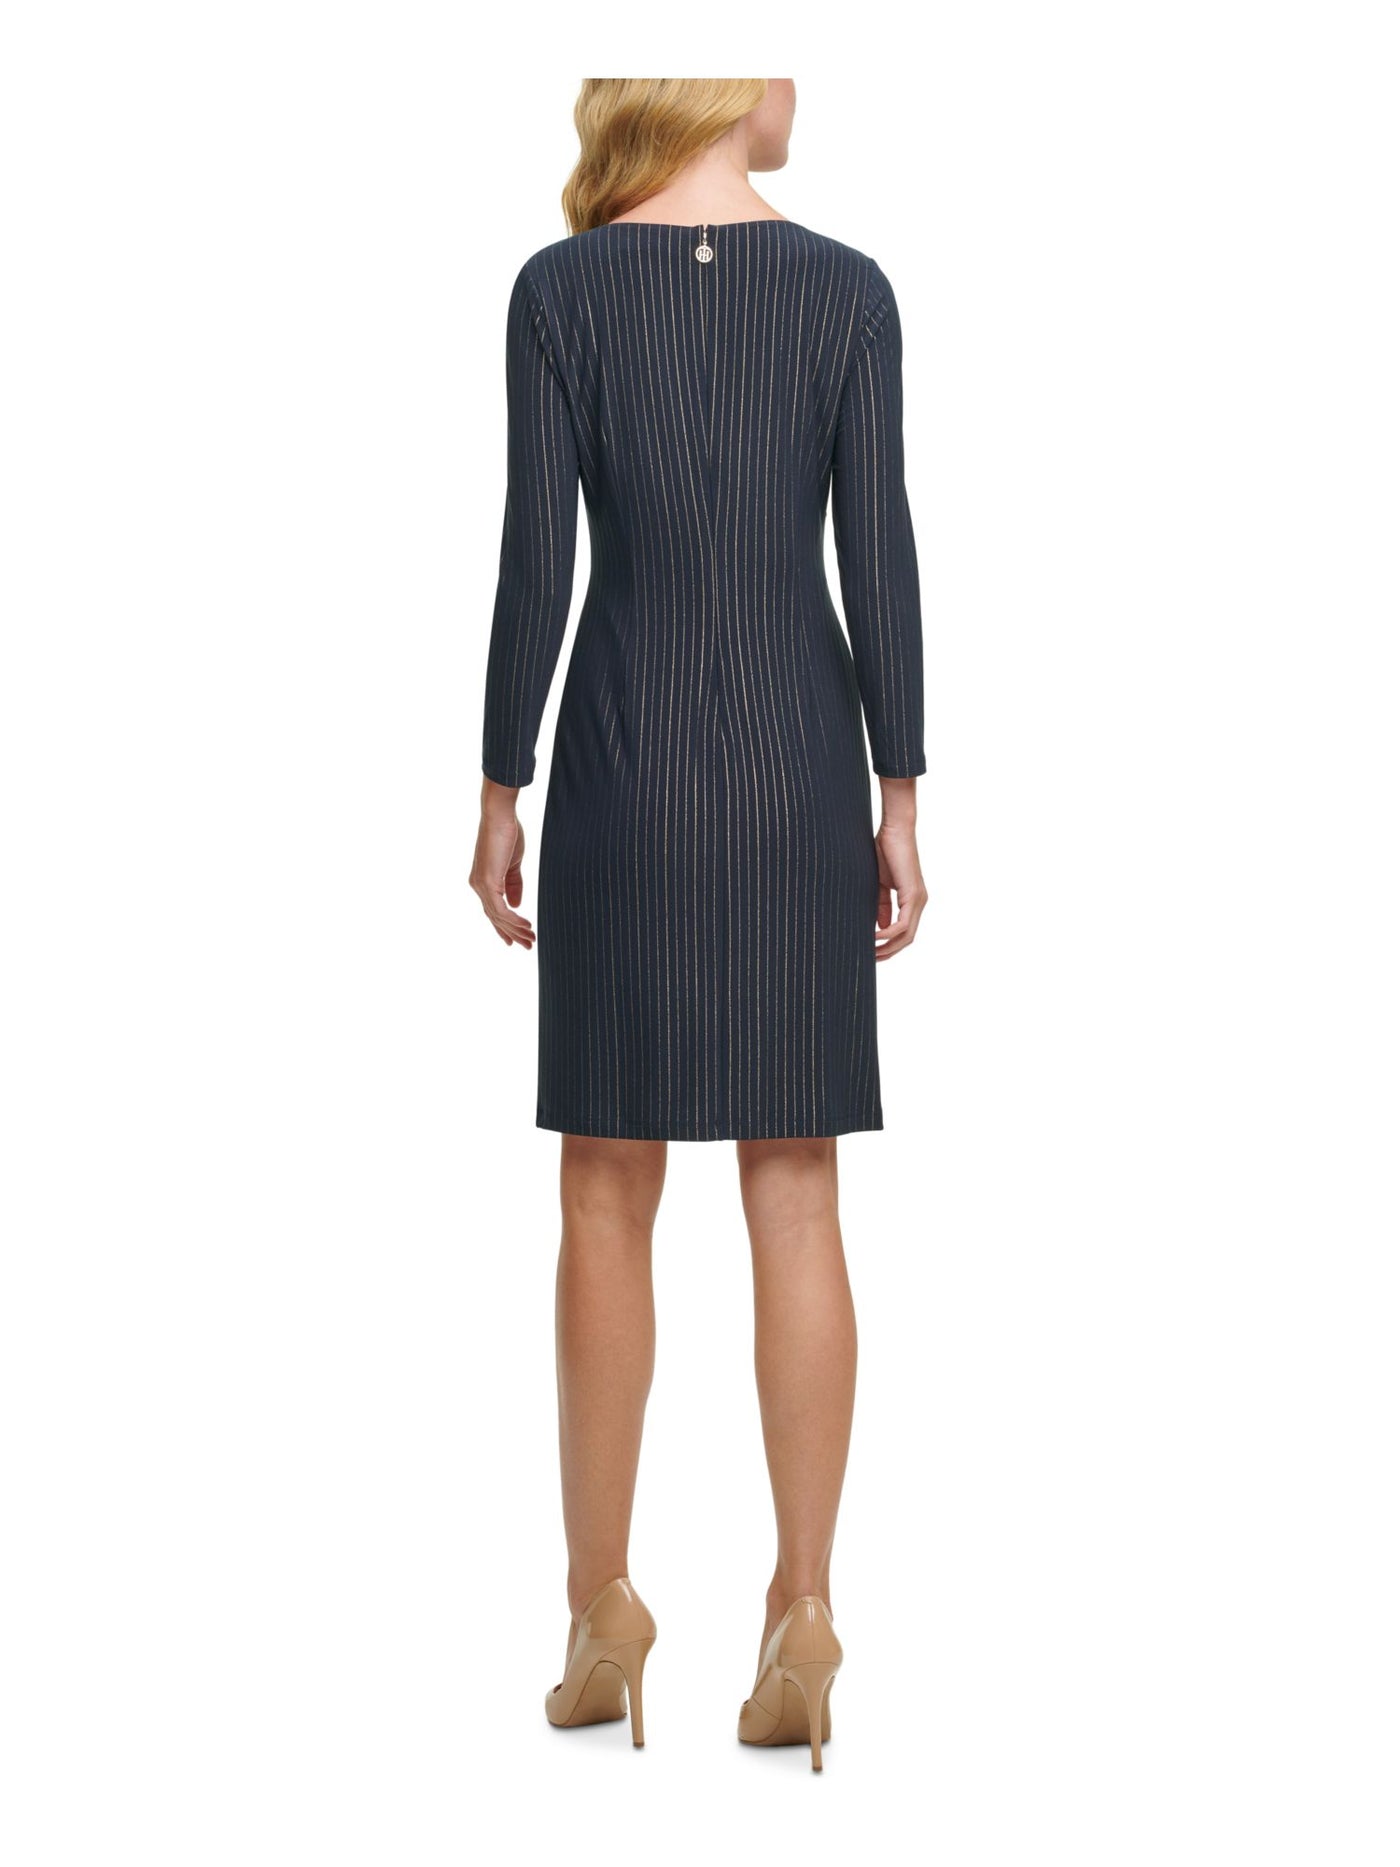 TOMMY HILFIGER Womens Navy Striped Long Sleeve Crew Neck Above The Knee Wear To Work Sheath Dress 6